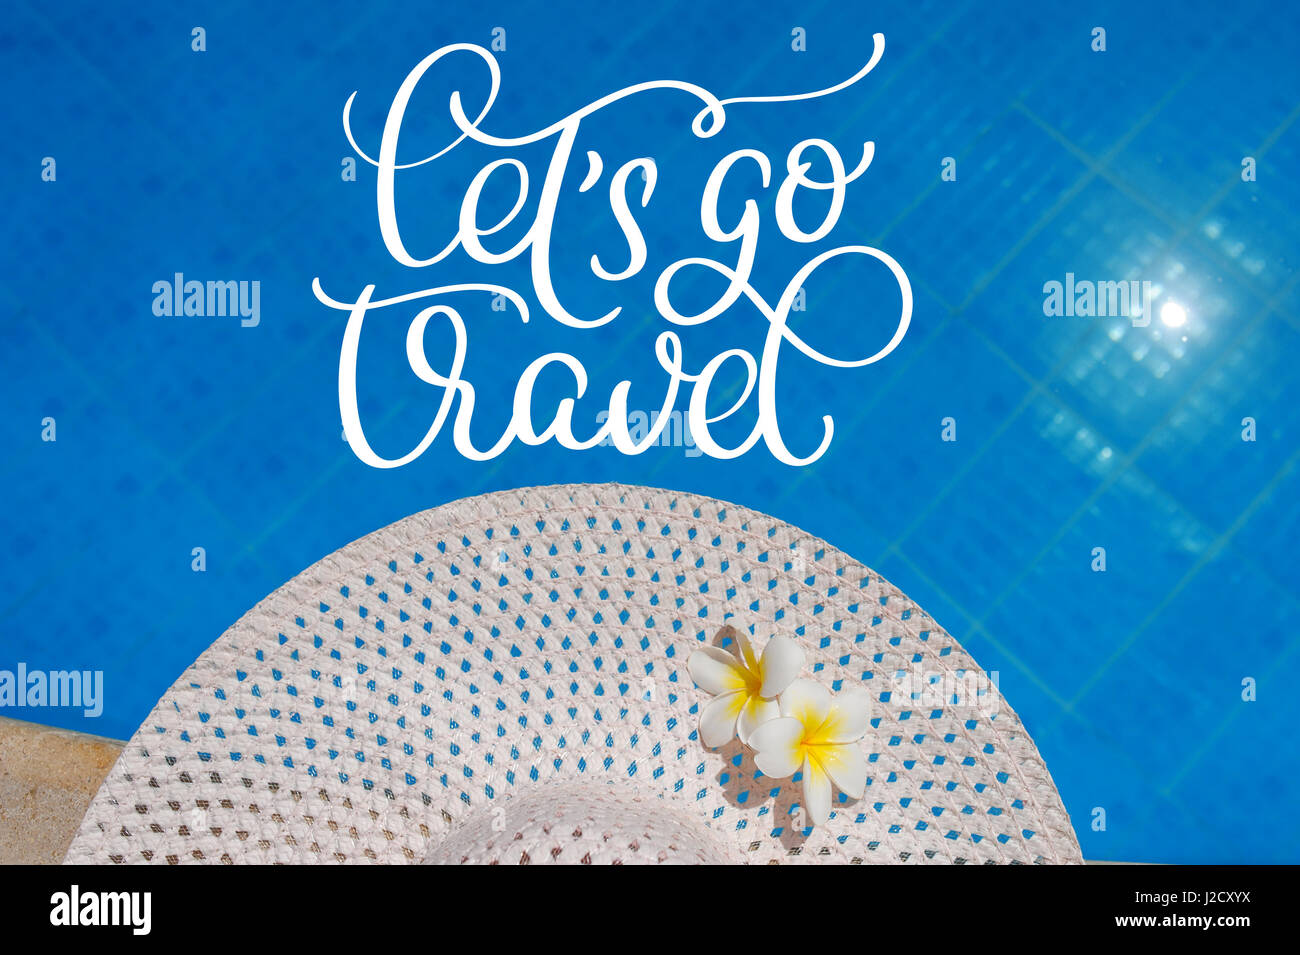 Big white hat on the edge of the pool and text Lets go travel. Calligraphy lettering hand draw Stock Photo